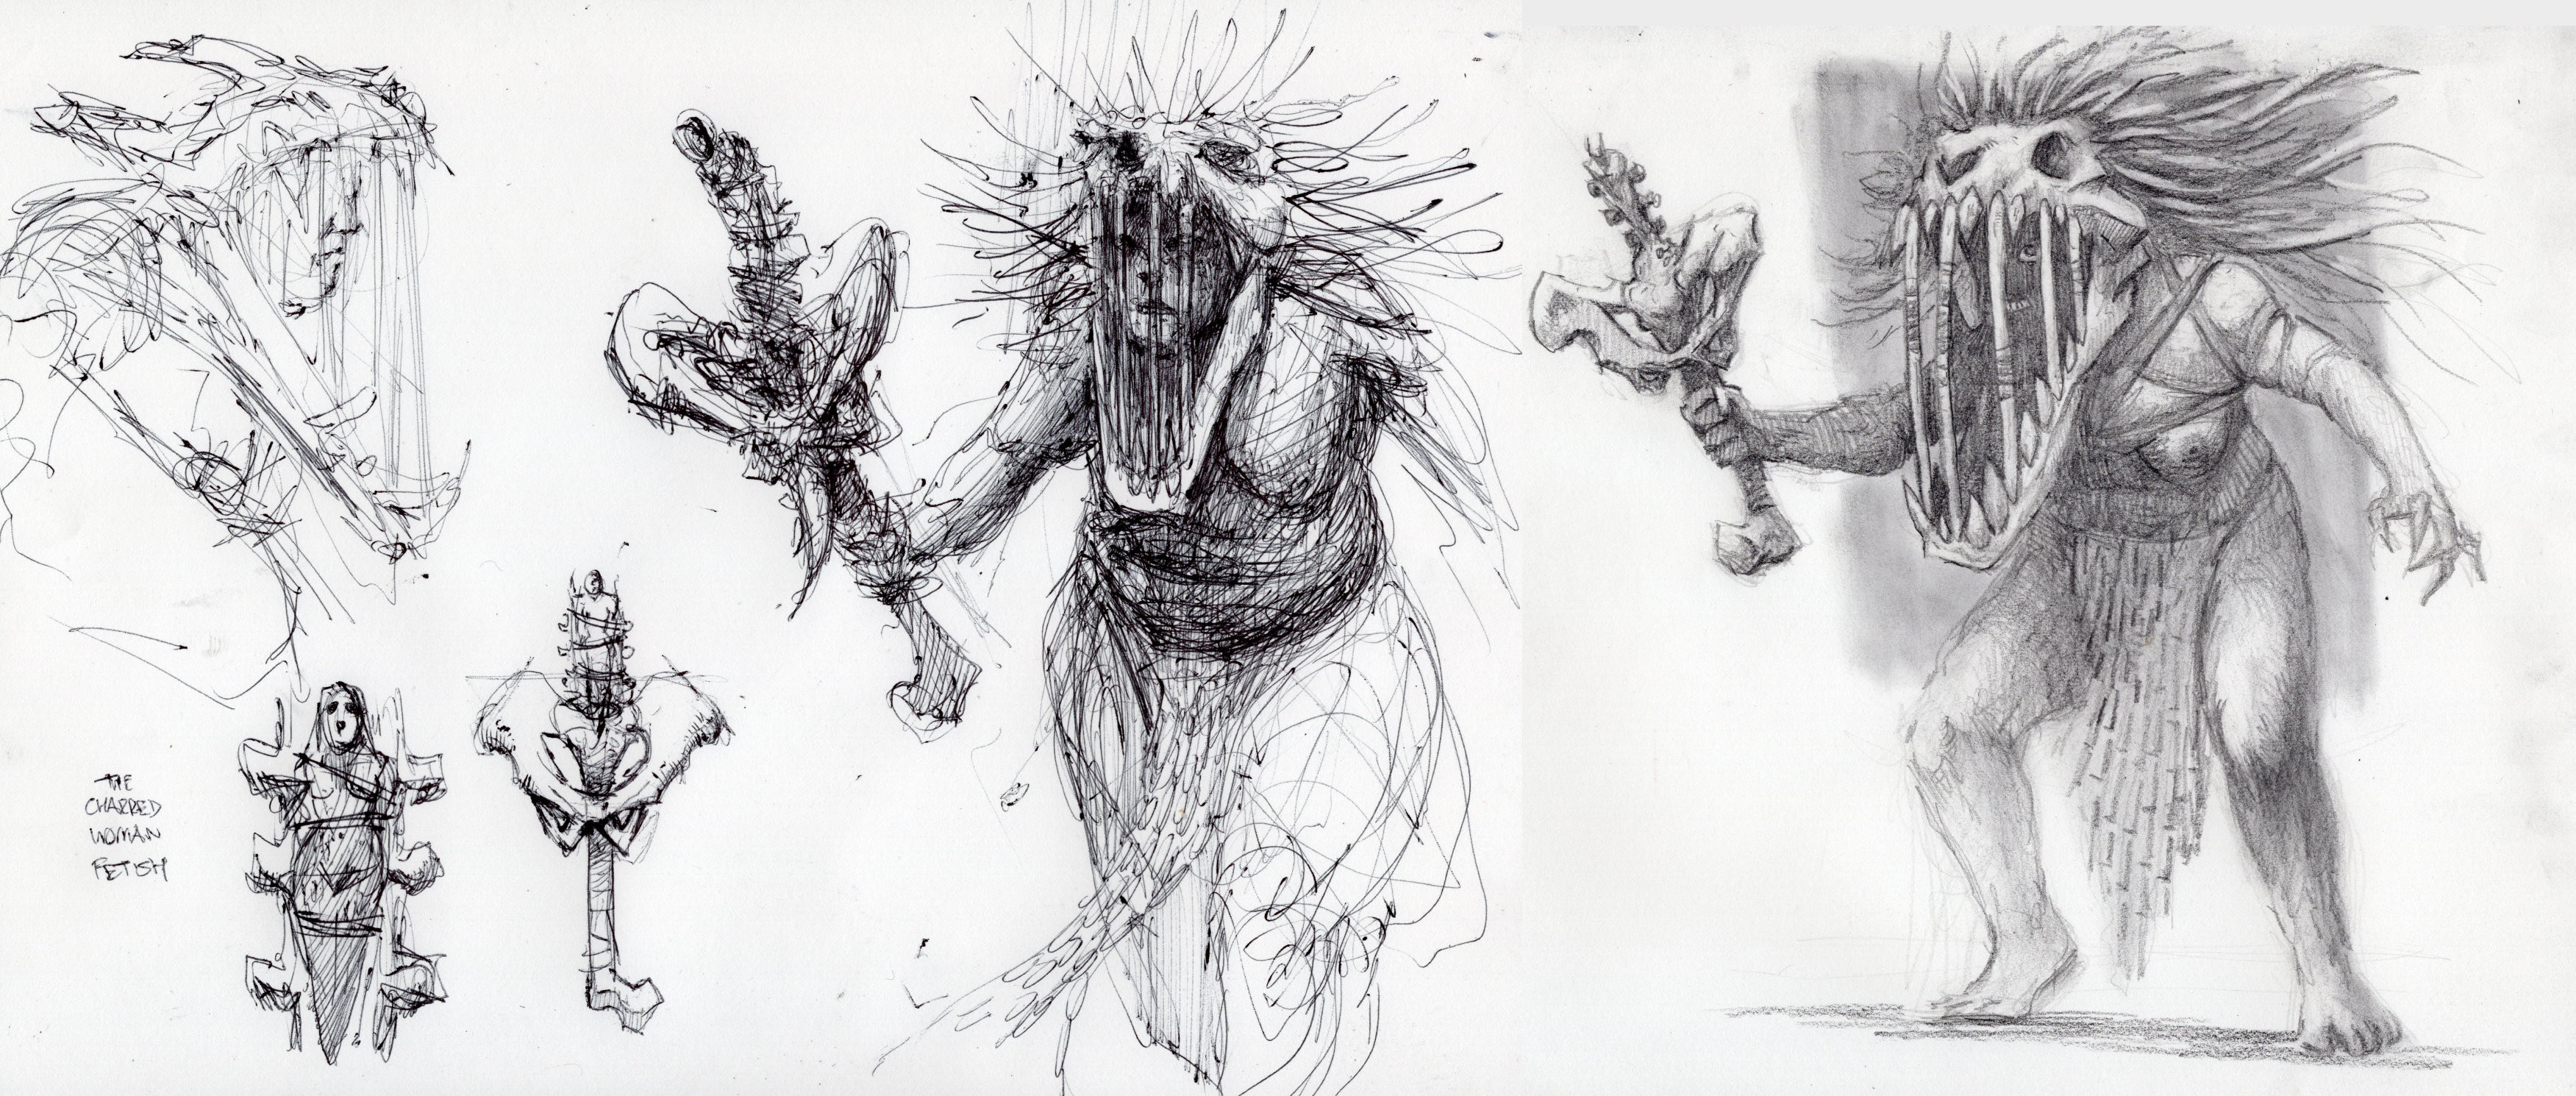 Initial sketches in ballpoint pen and graphite